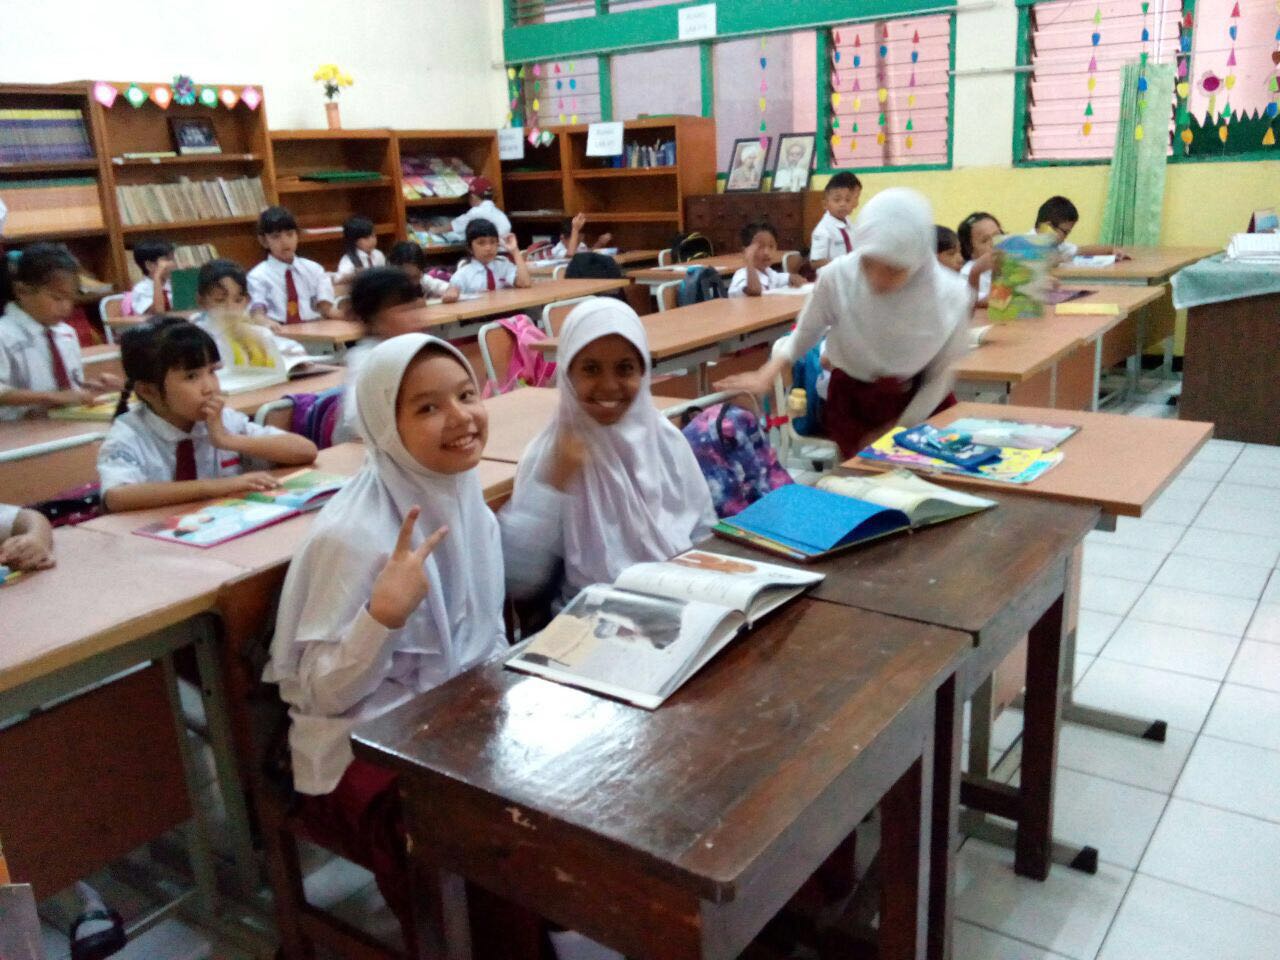 Indonesia gives refugee children hope for a brighter future